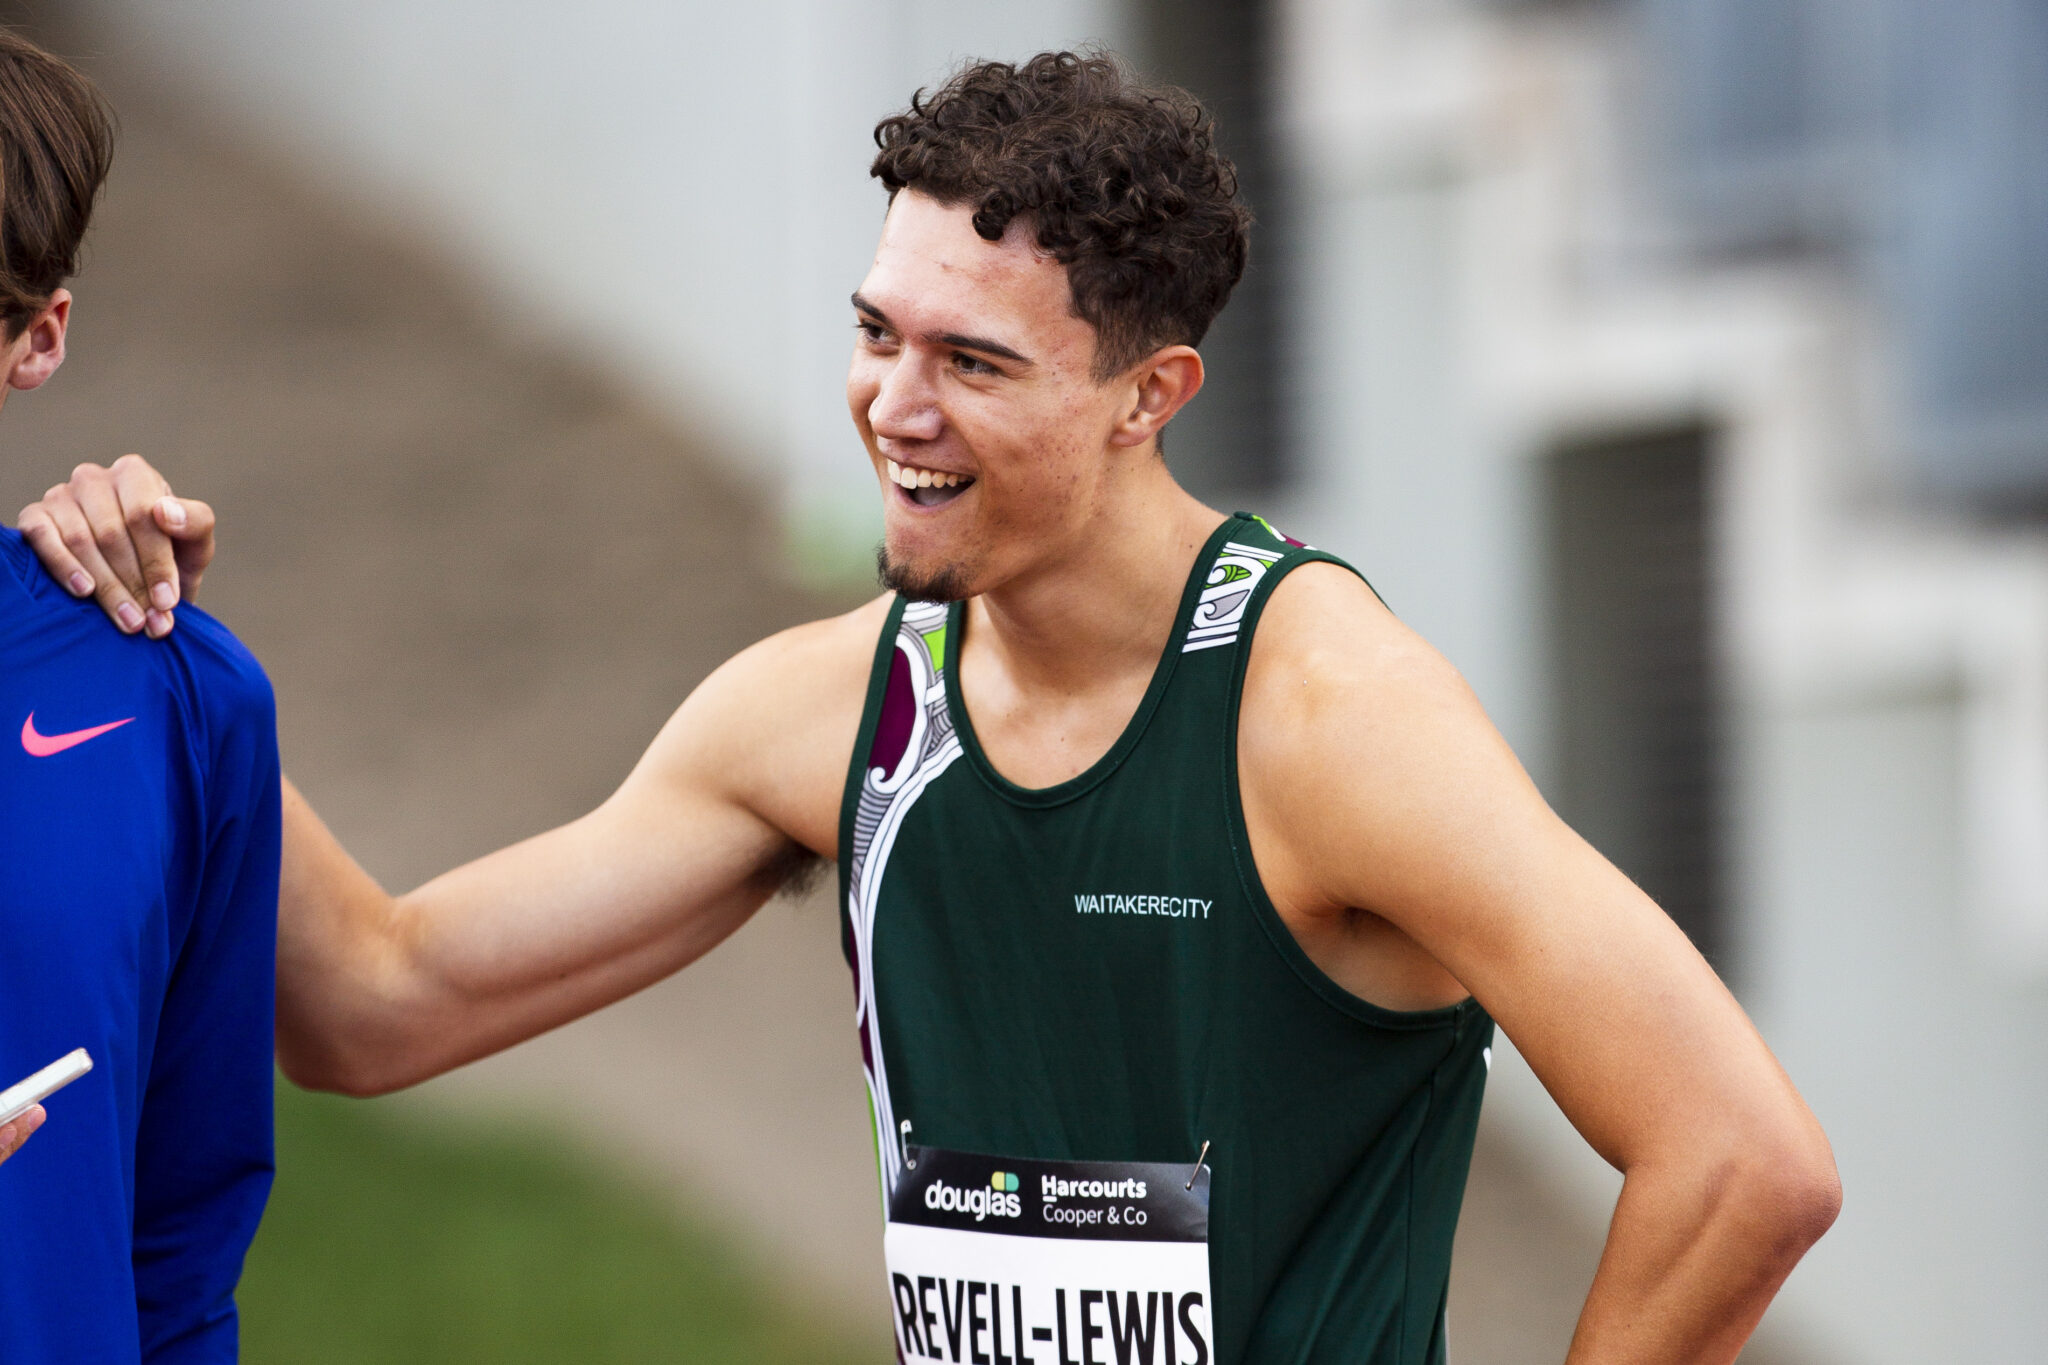 Aitchison, Olivier and Revell-Lewis excel at Sir Graeme Douglas  International presented by Harcourts Cooper & Co - Athletics New Zealand